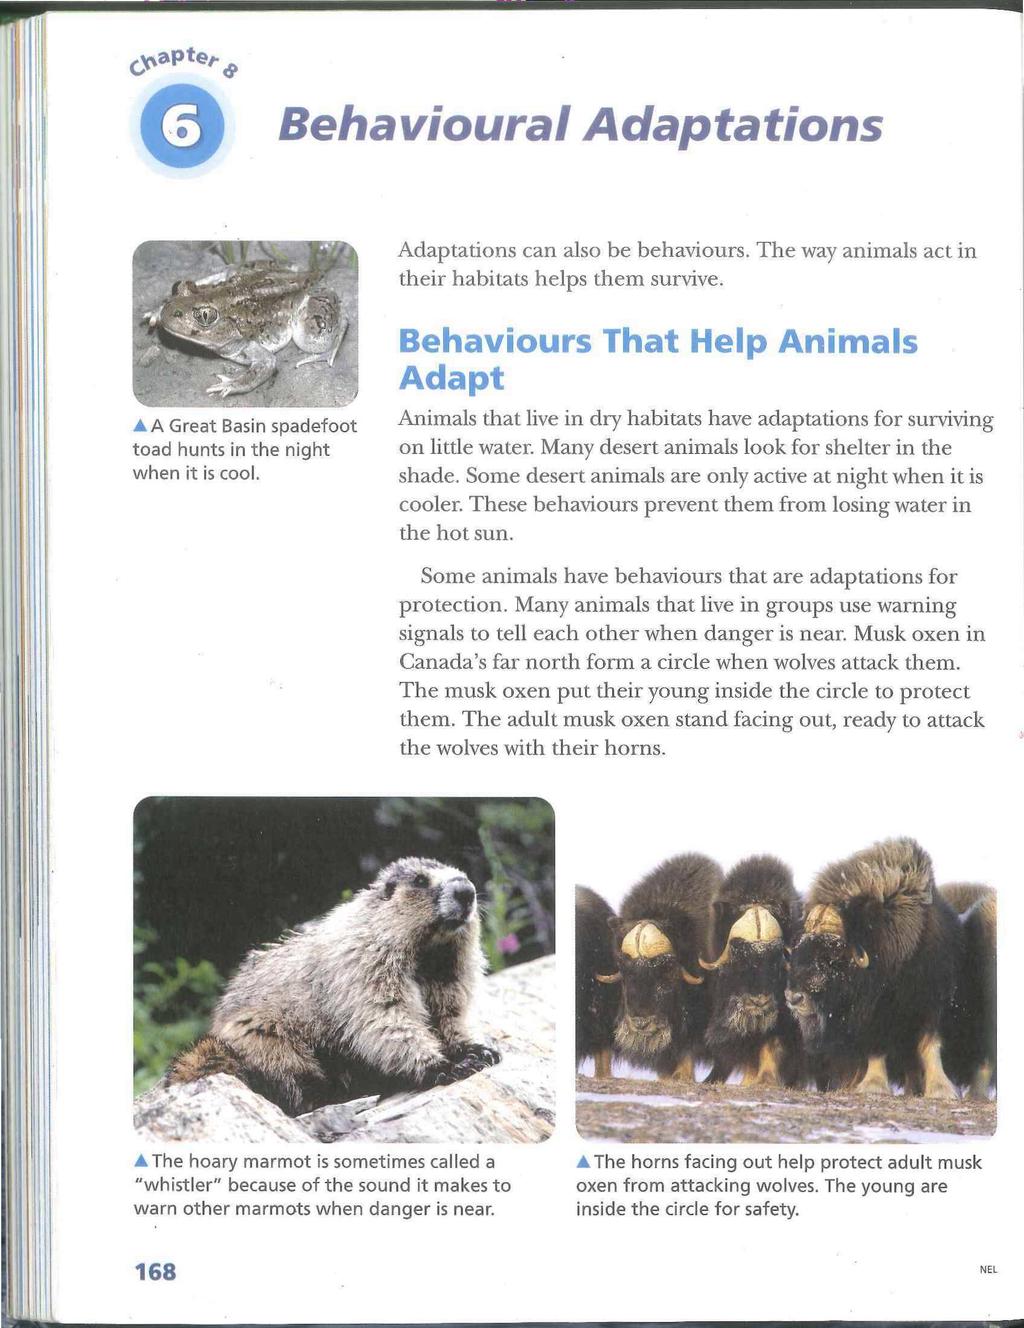 Cjciaple,^ Behavioural Adaptations Adaptations can also be behaviours. The way animals act in their habitats helps them survive.